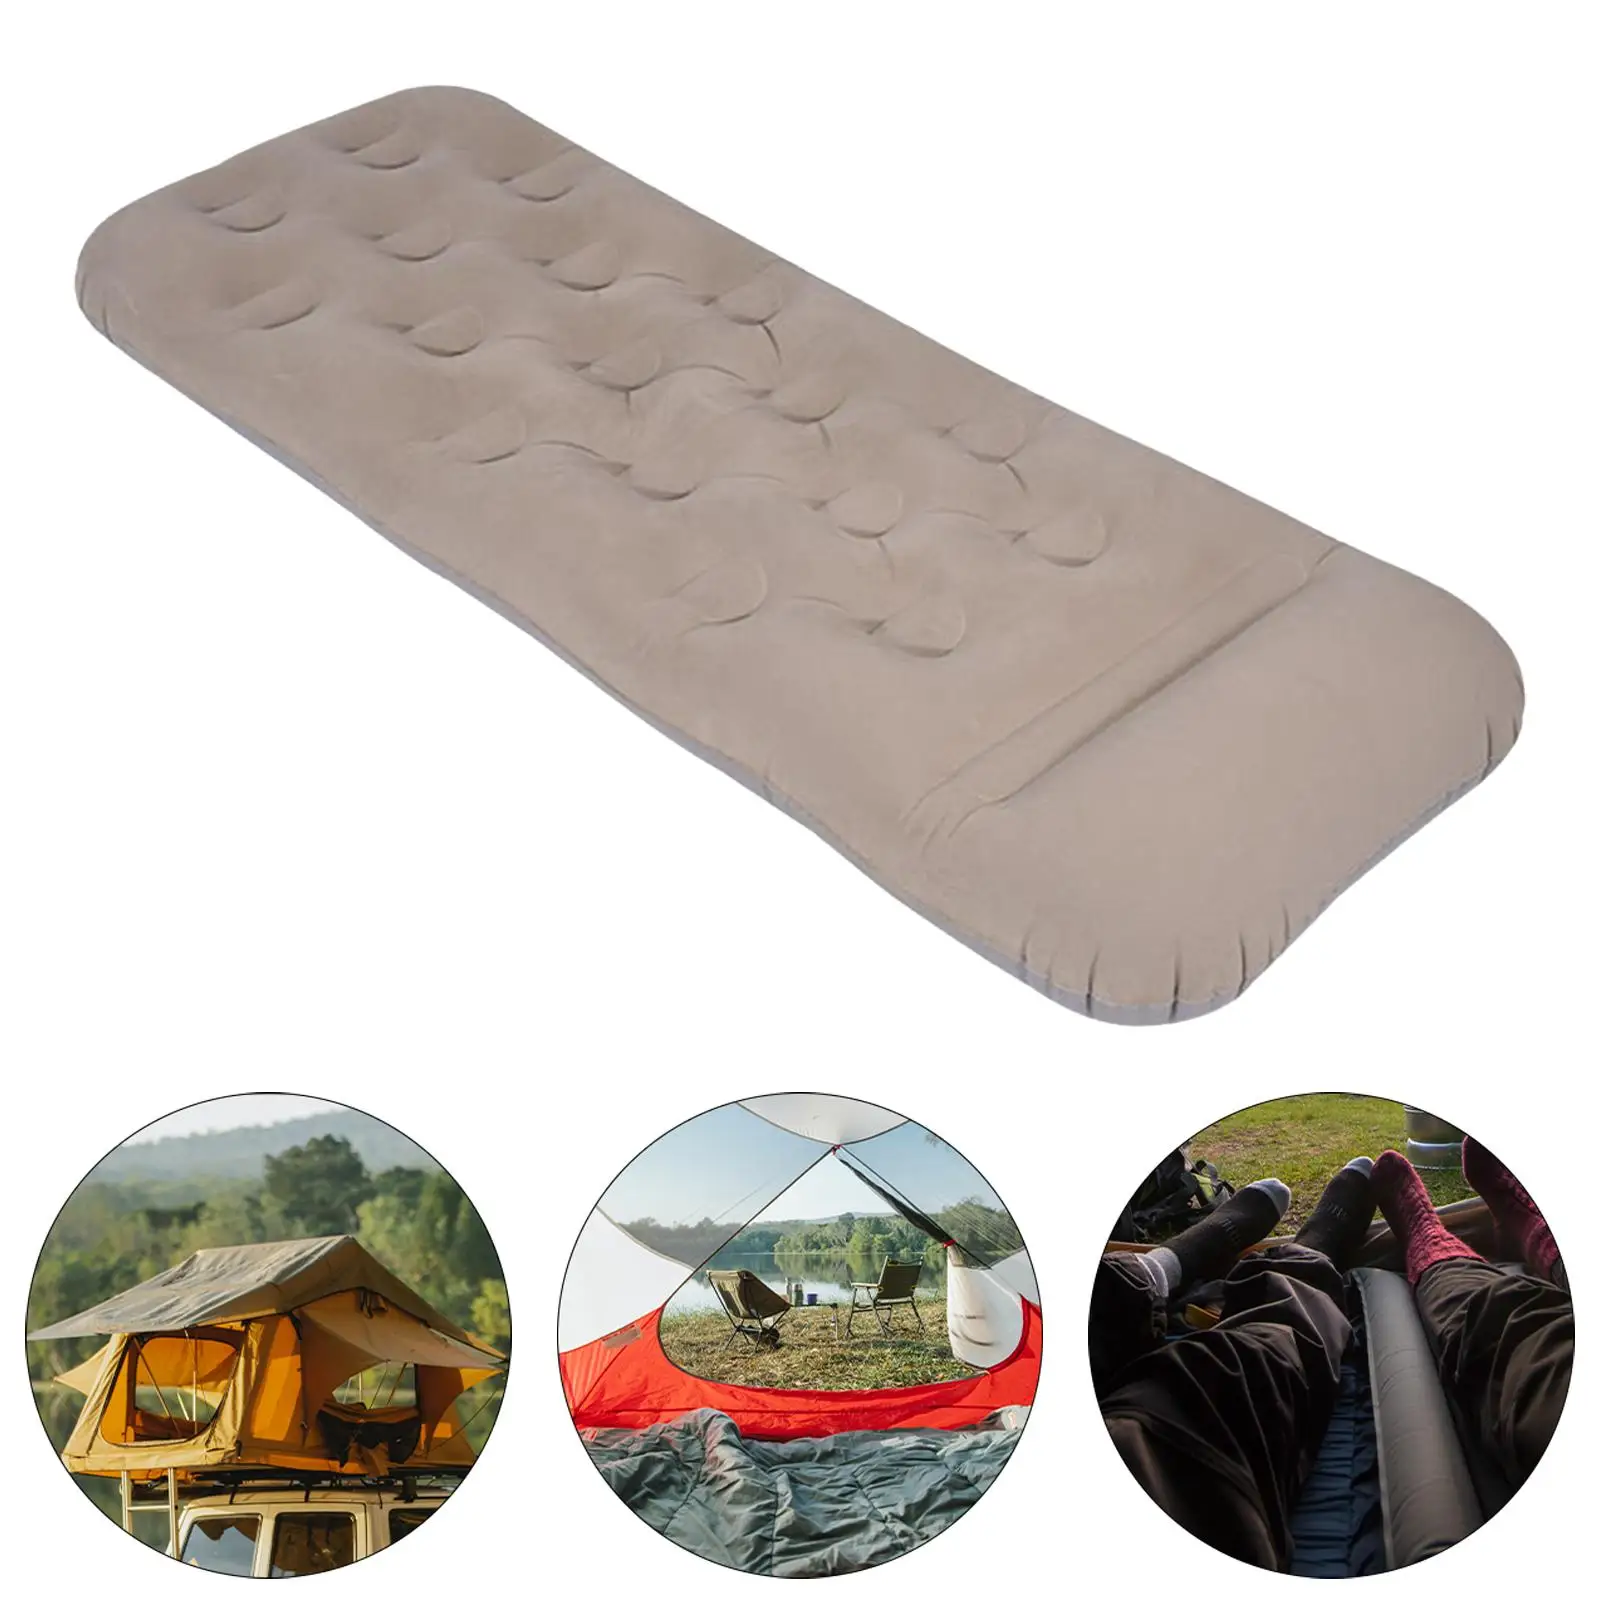 Camping Air Mattress Portable Flocking Top Foldable Comfortable Air Bed Blow up Mattress Inflatable Mat for Indoor Outdoor Home